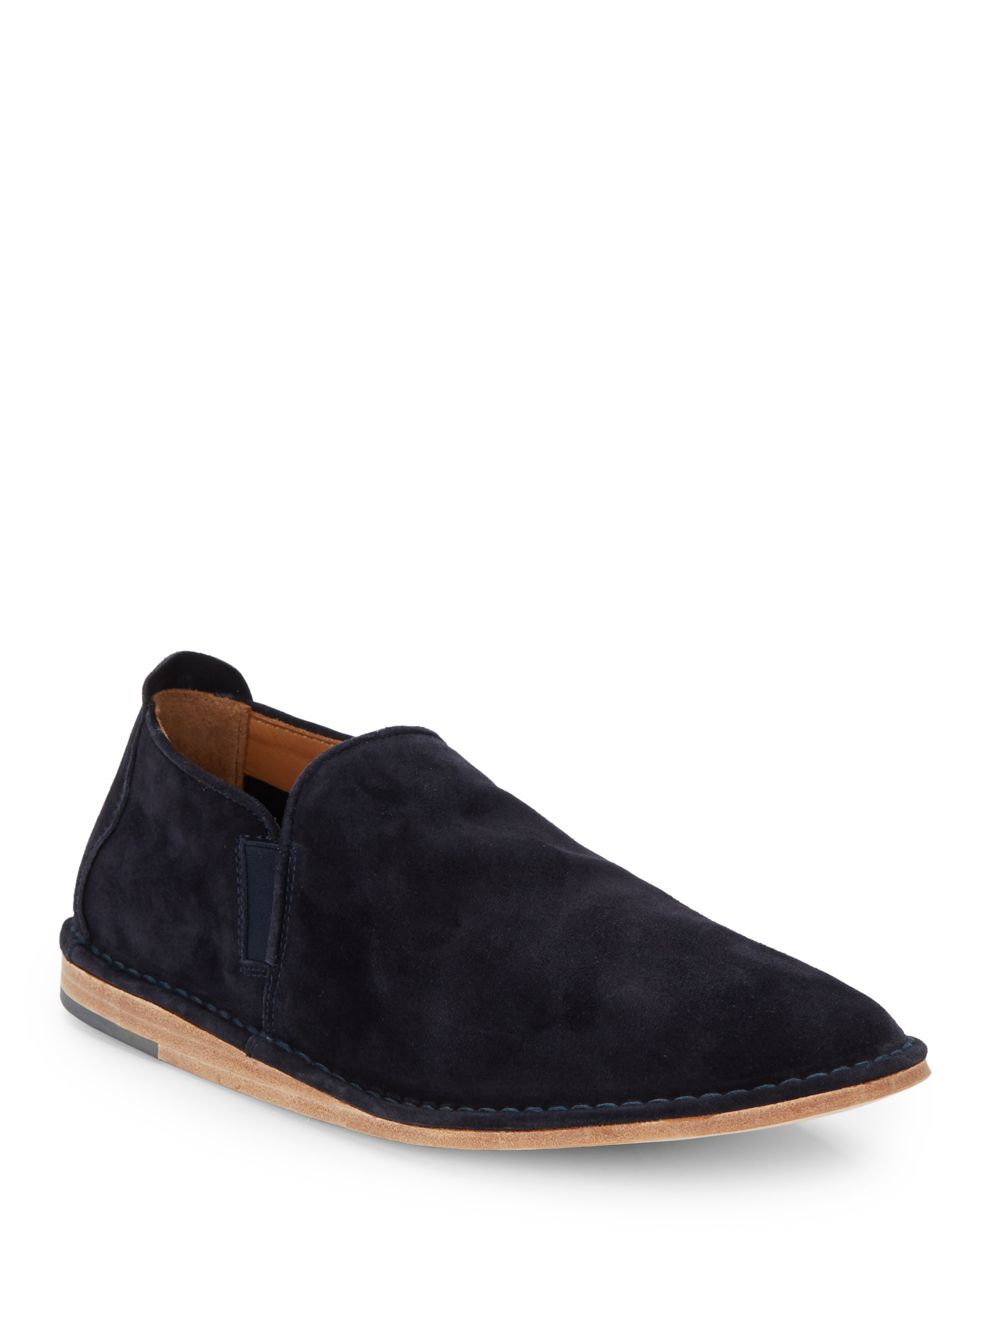 Vince Nico Suede Slip-on Shoes in Blue for Men - Lyst